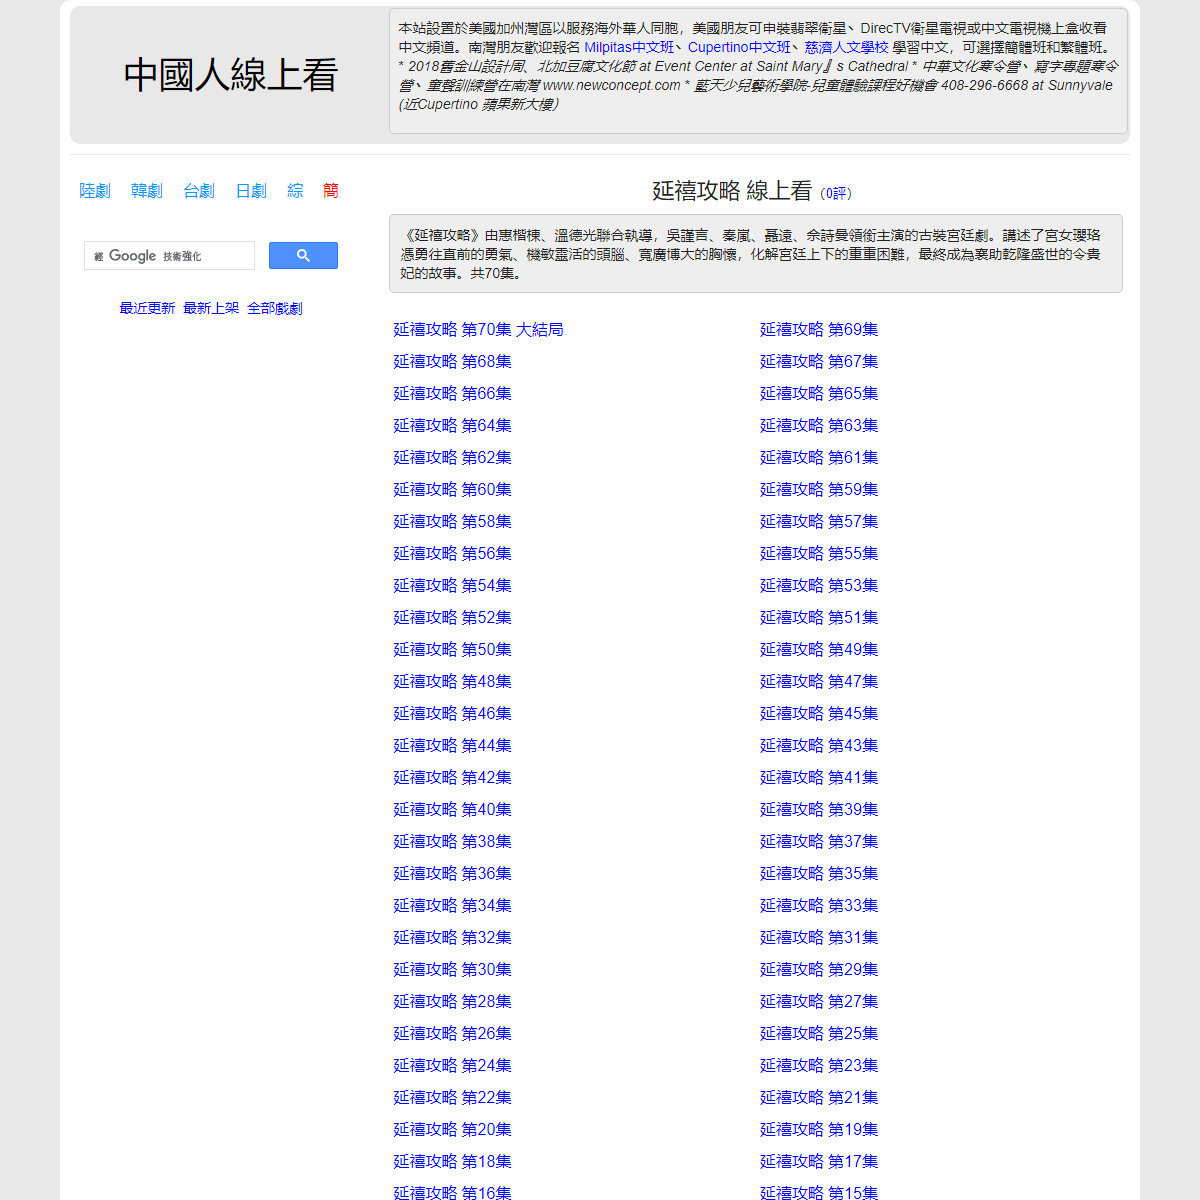 A complete backup of https://chinaq.tv/cn180719/